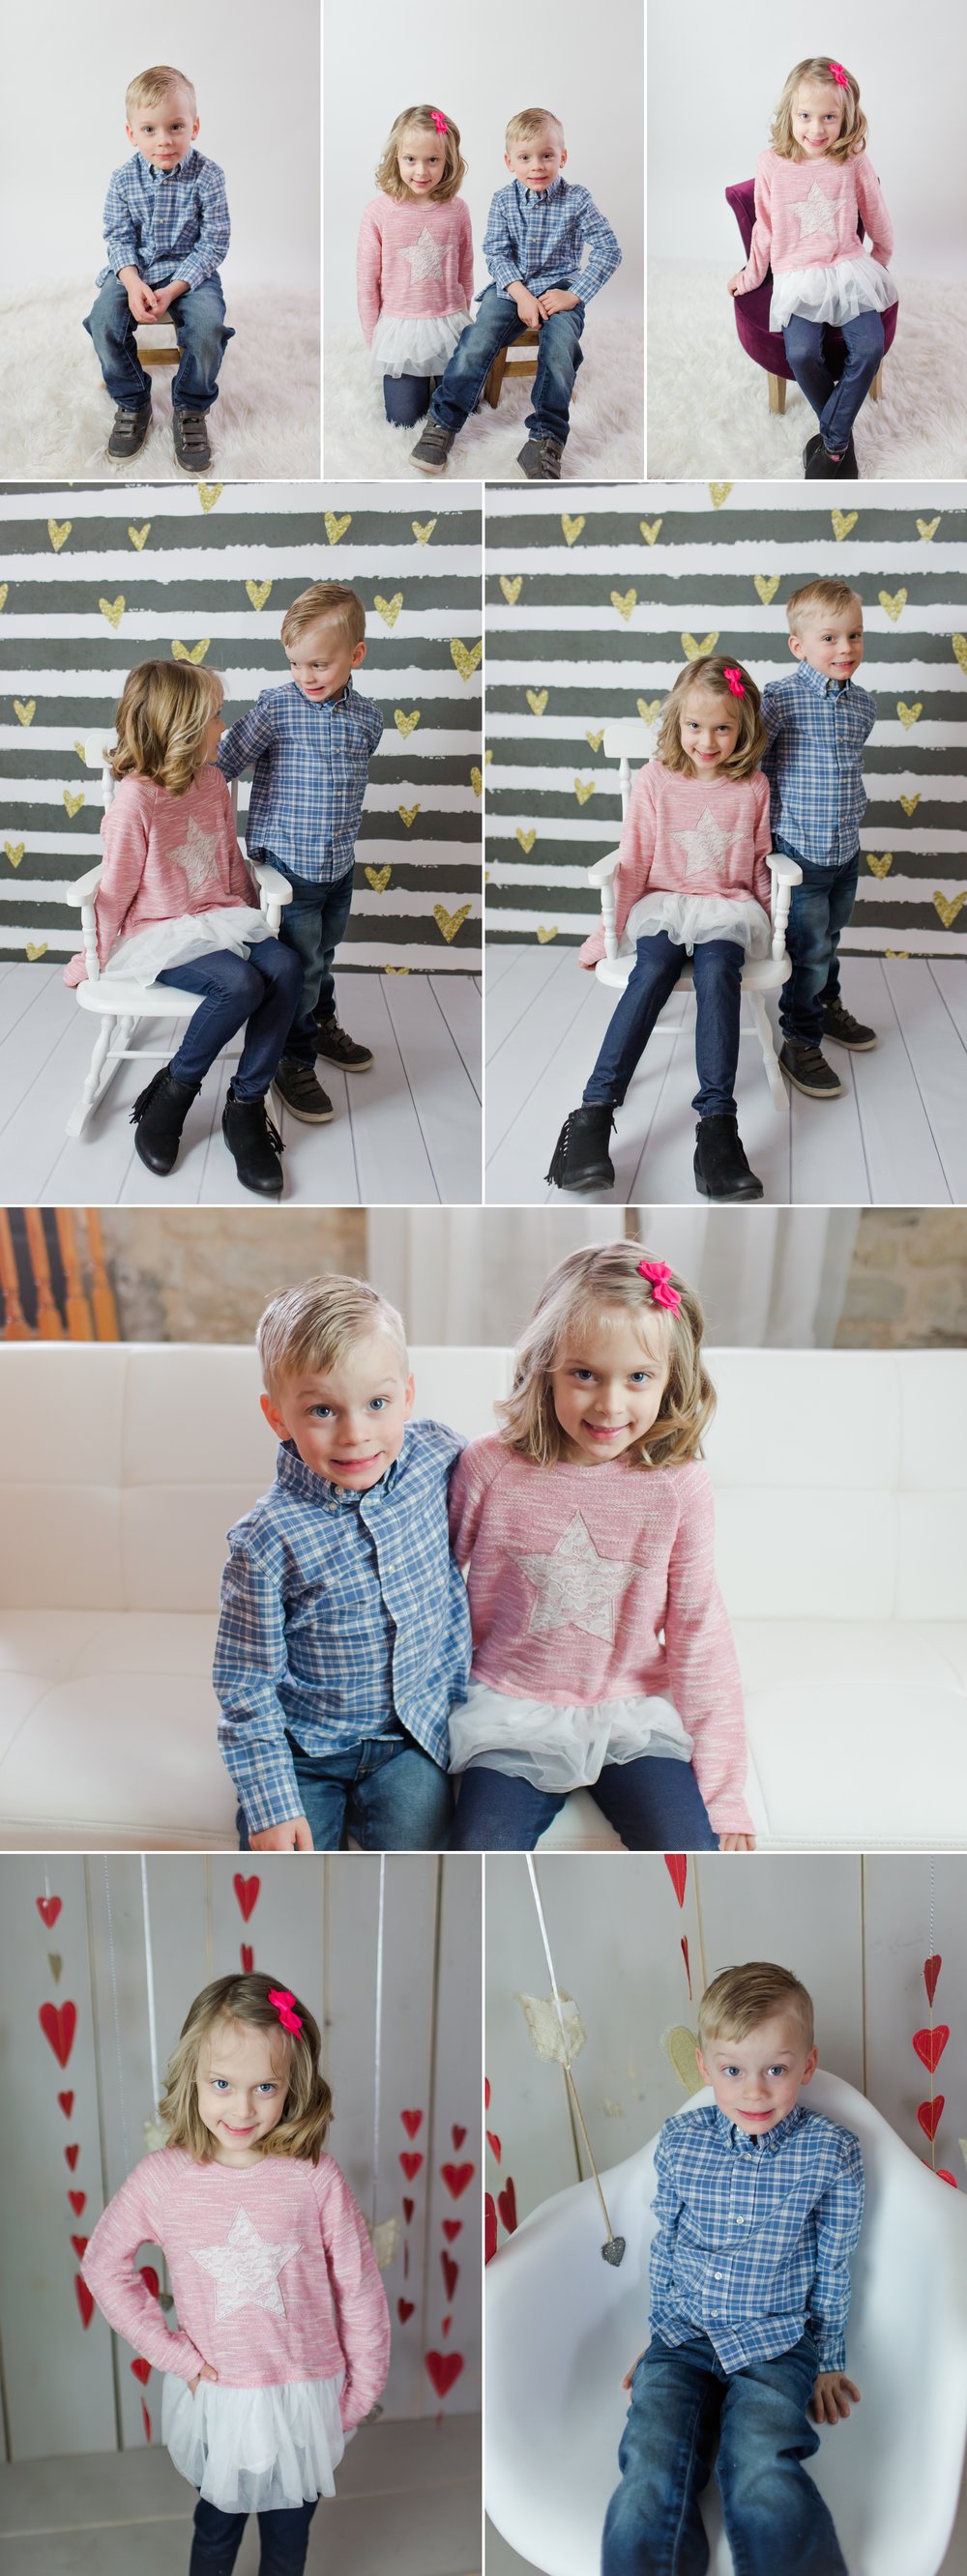  valentine_mini_sessions_mini_session_photography_sibling_baby_toddler_props_hearts_ideas 4 